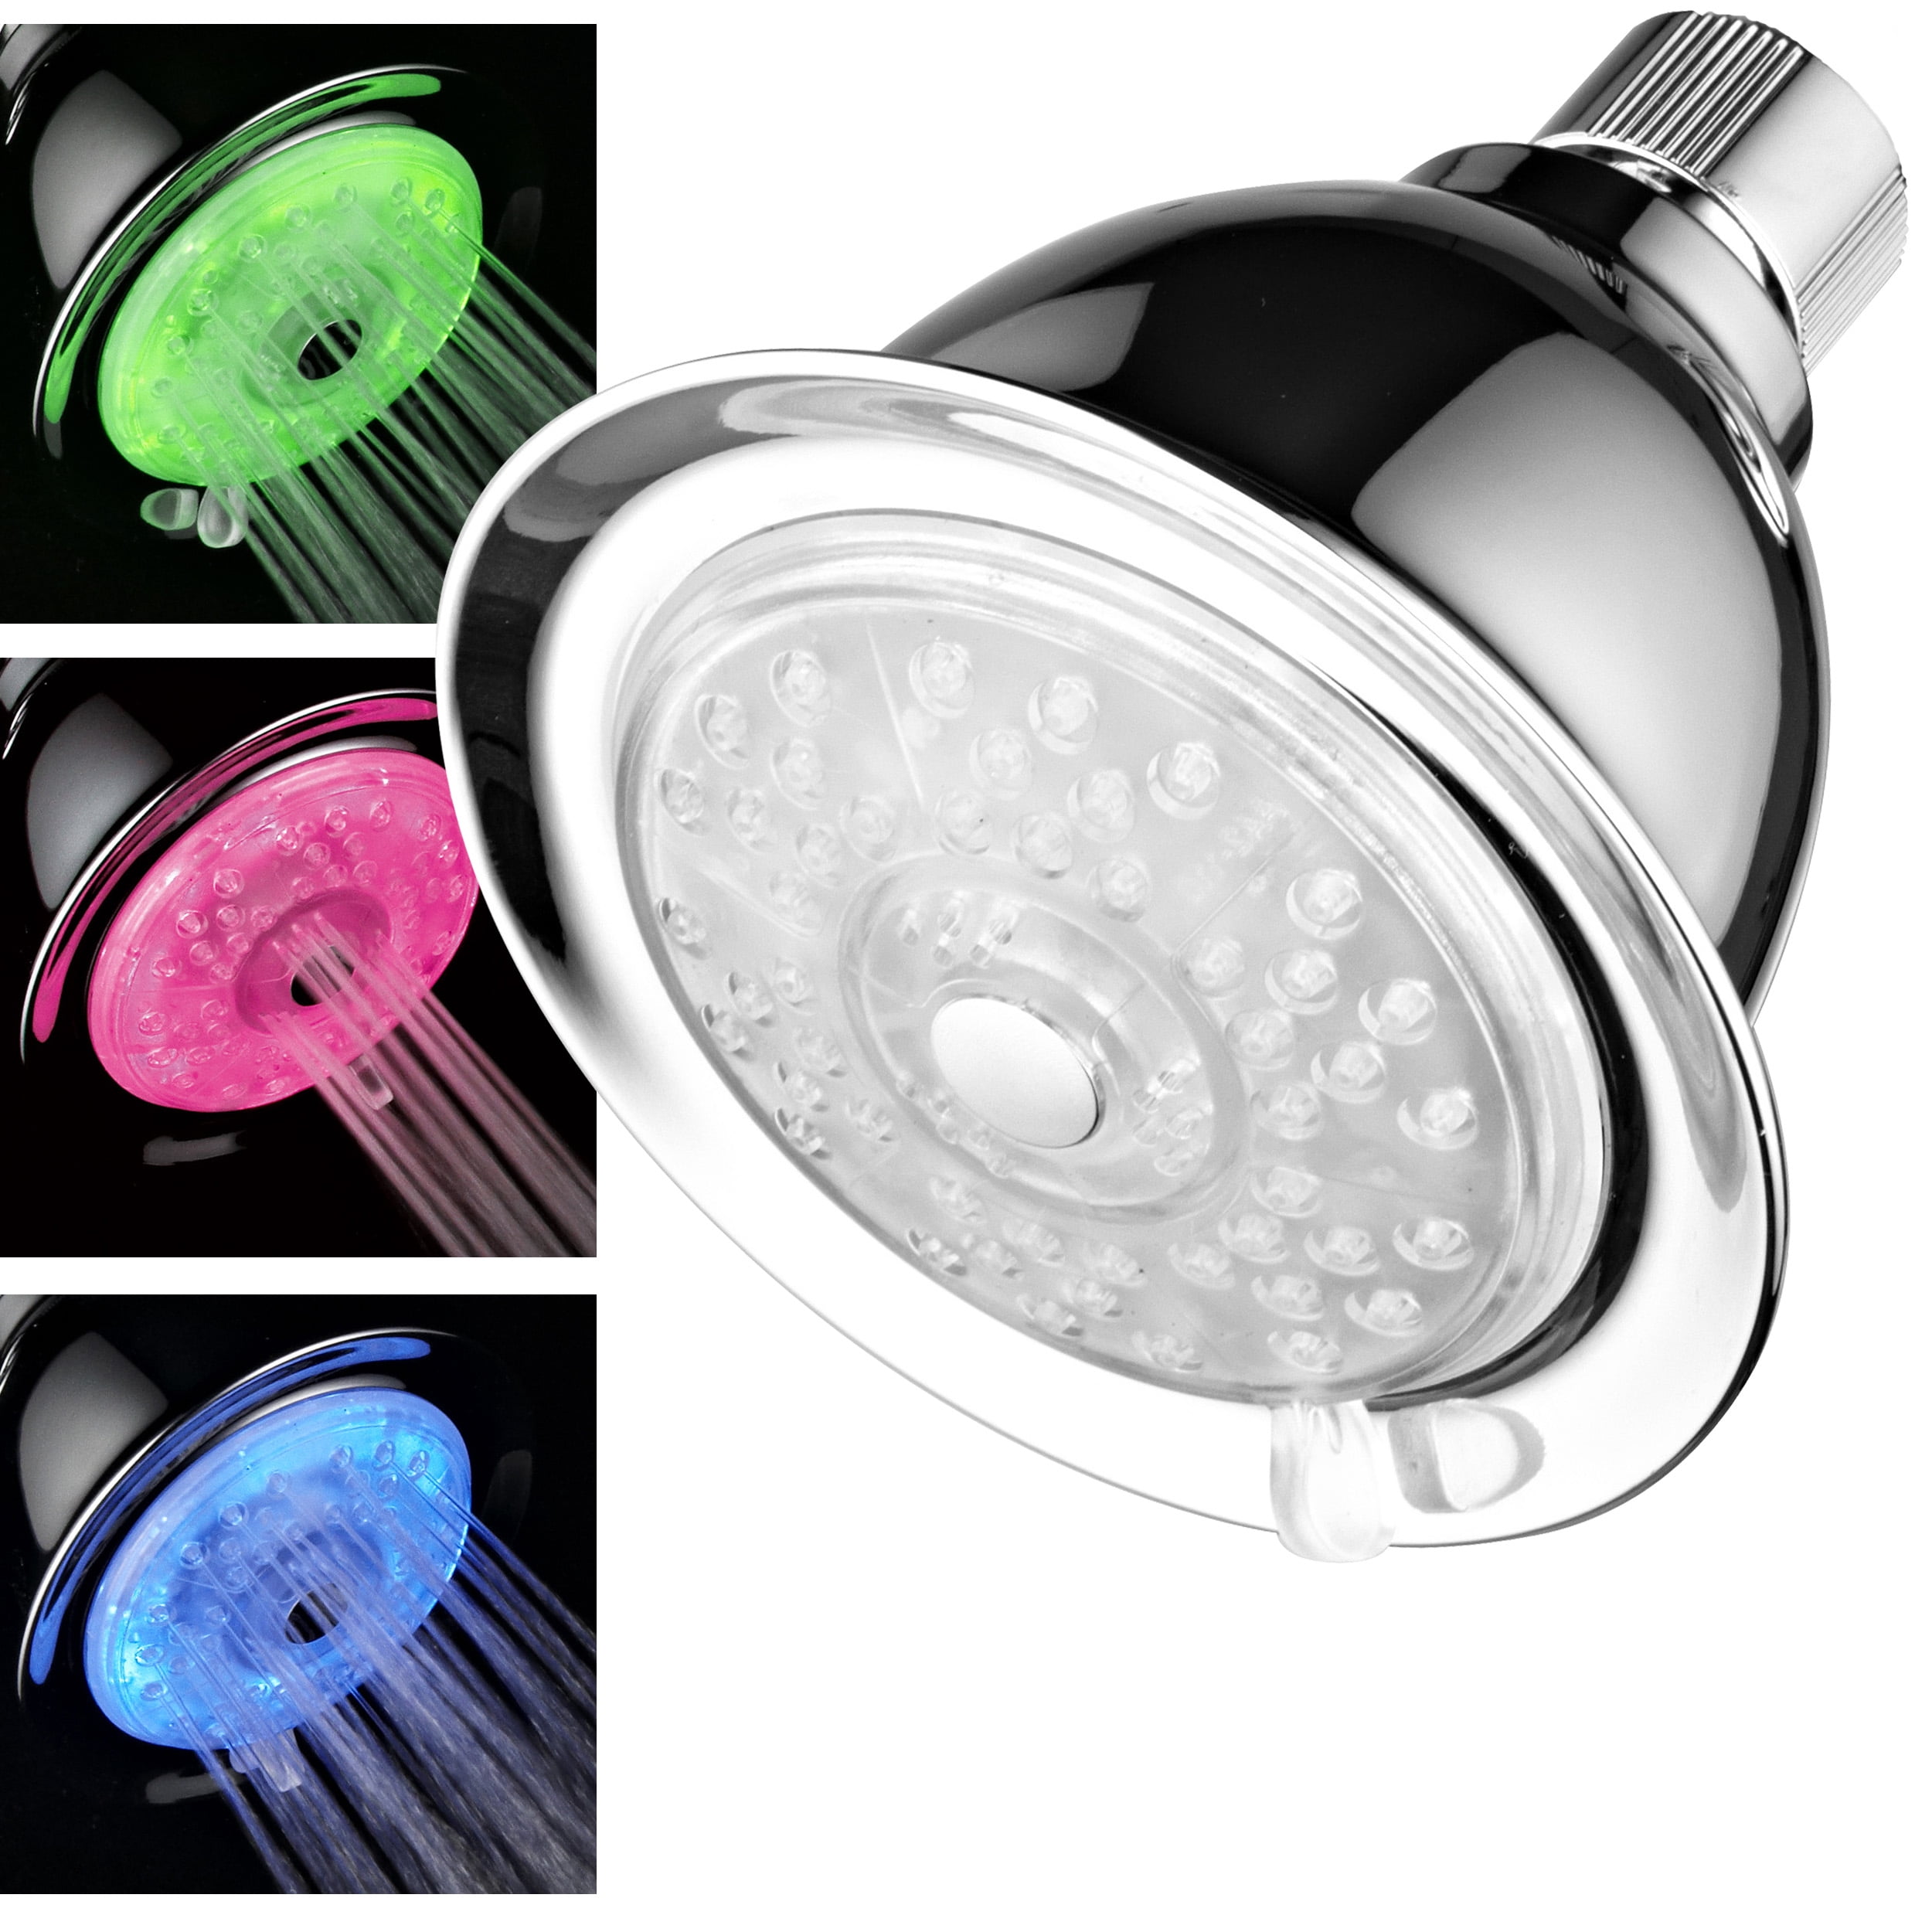 Luminex by PowerSpa 7-color 4-setting LED Handheld Shower Head With Air Jet Few for sale online 